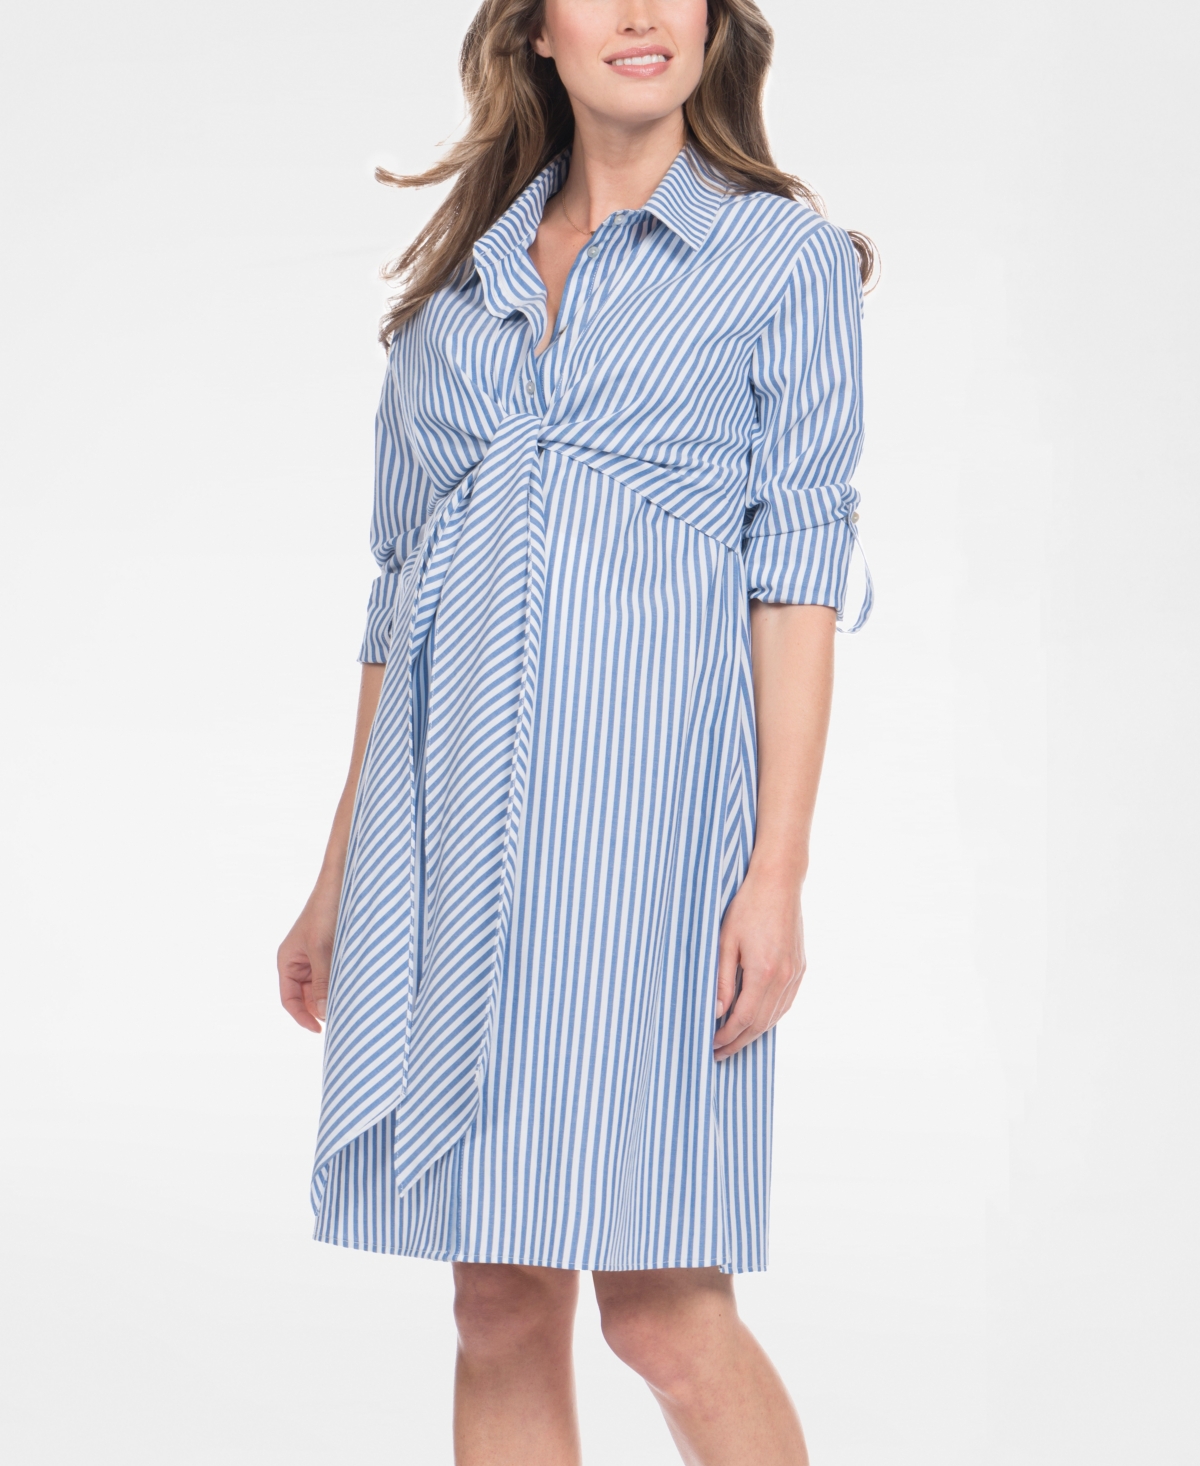 Seraphine Women's Cotton And Lyocell Maternity And Nursing Shirt Dress In Blue Stripe